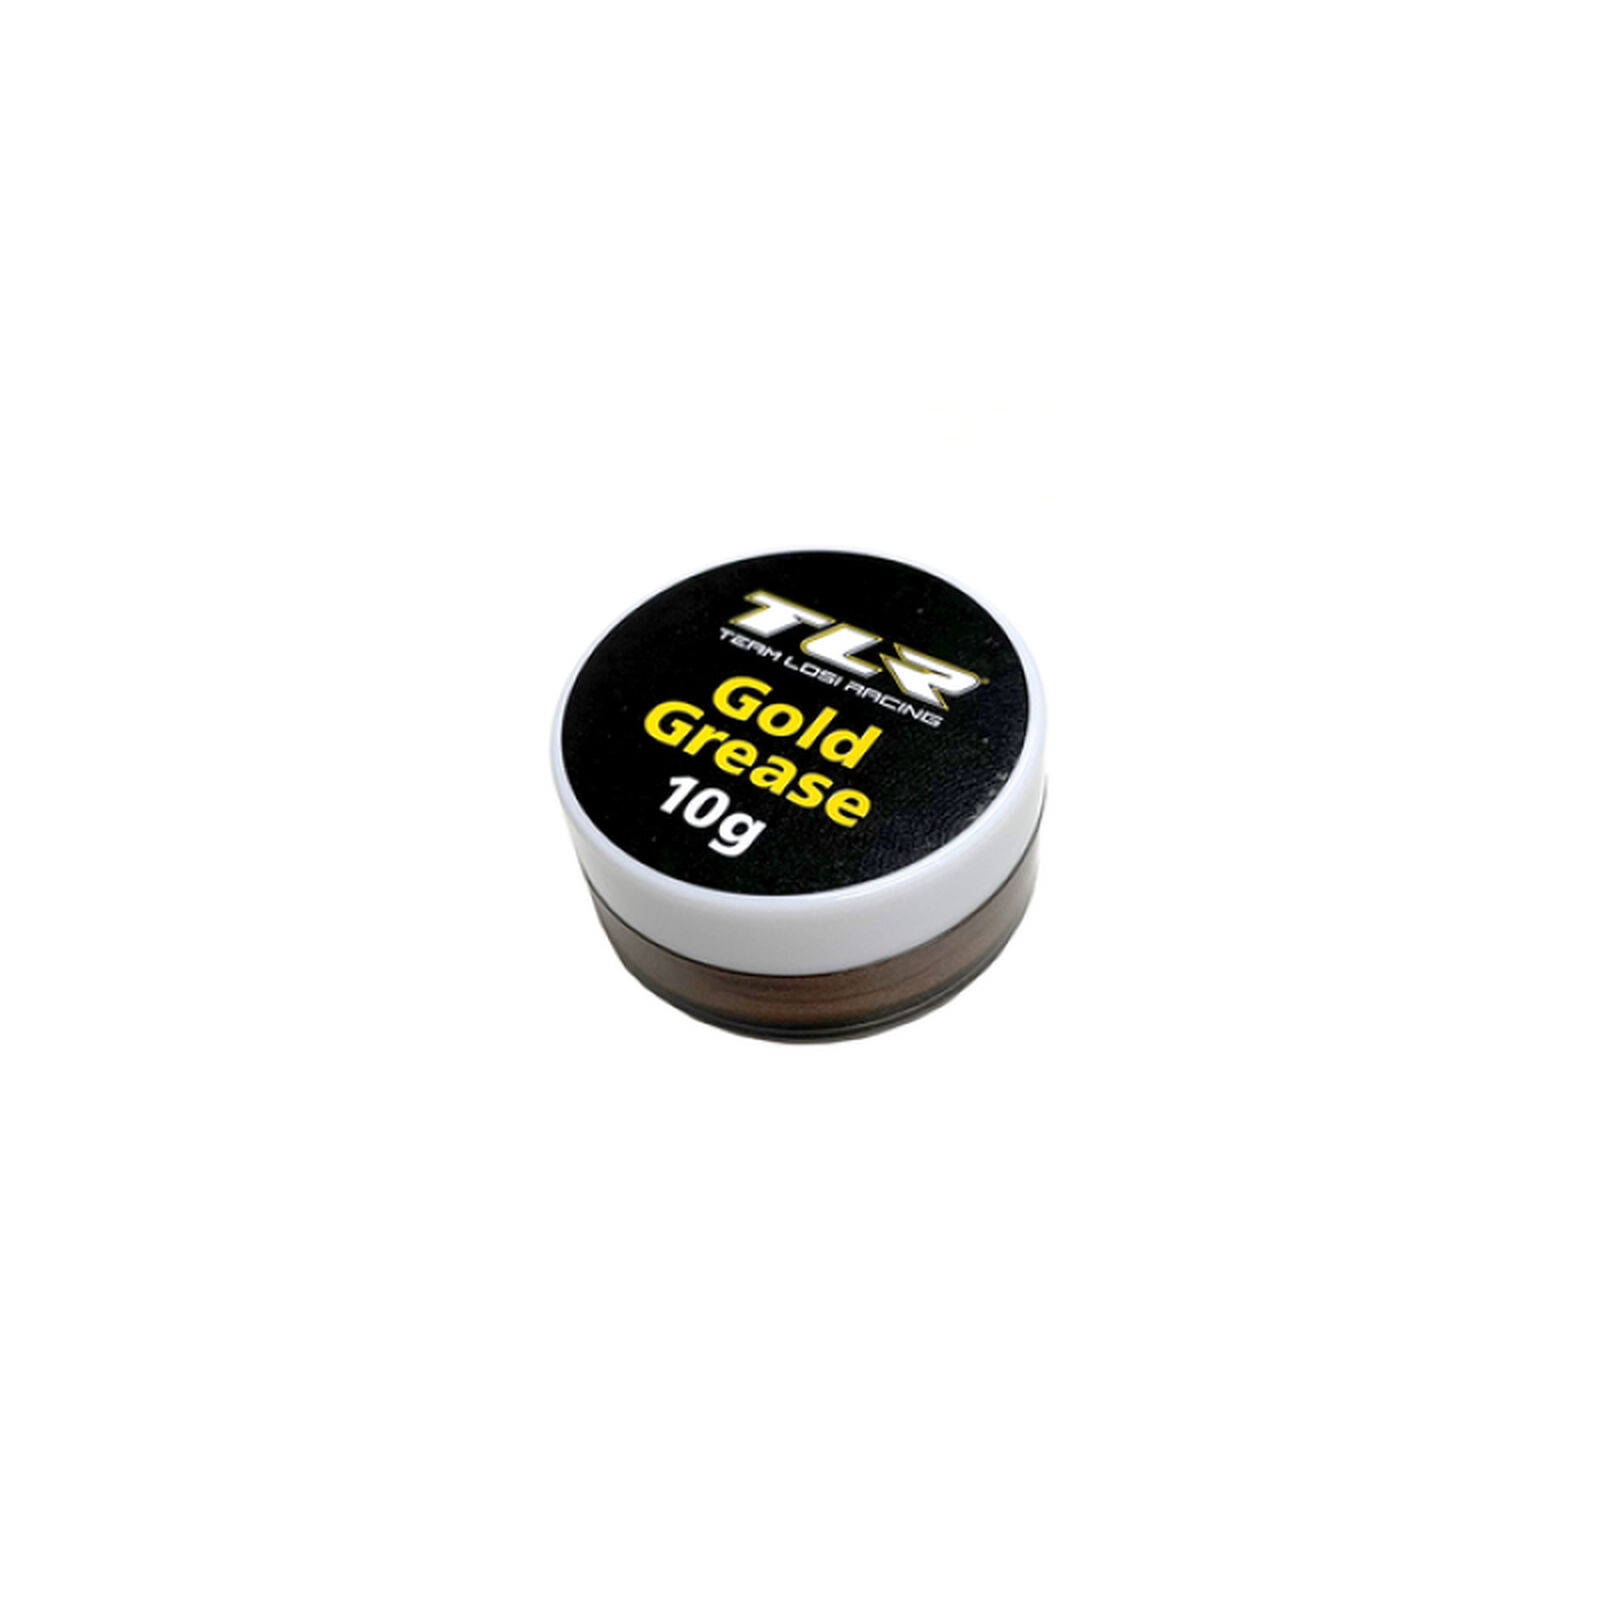 Gold Grease, 10g